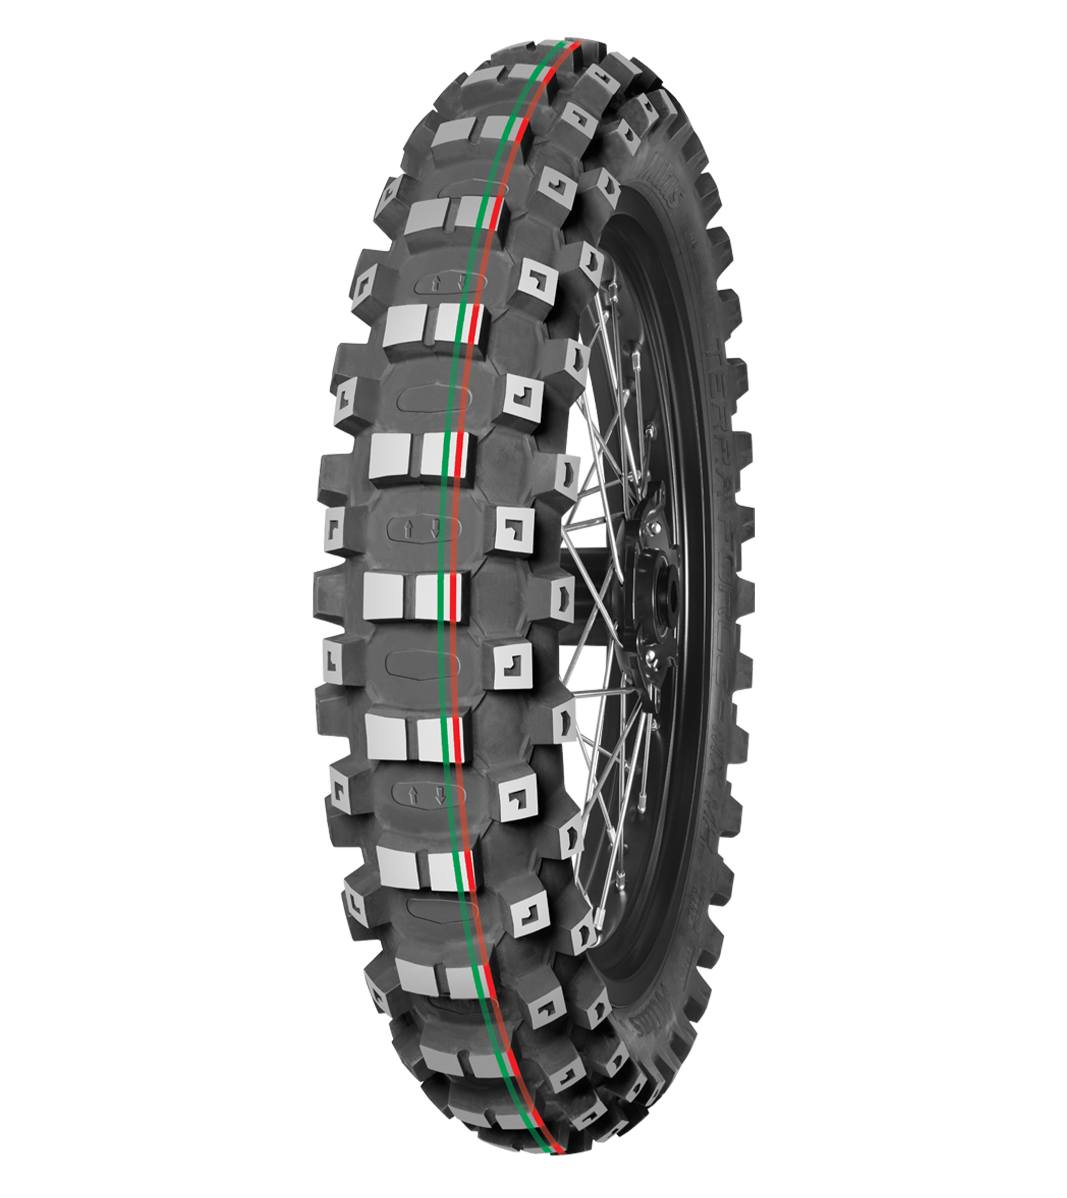 Mitas TERRA FORCE-MX MH 90/100-14 Motocross Competition Off-Road MEDIUM TO HARD 49M Red & Green Tube Rear Tire, 226033, 90/100-14, Motocross, Motocross Competition, Off-Road, Rear, Terra Force, Terra Force-MX MH, Trail, Tires - Imported and distributed in North & South America by Lindeco Genuine Powersports - Premier Powersports Equipment and Accessories for Motorcycle Enthusiasts, Professional Riders and Dealers.